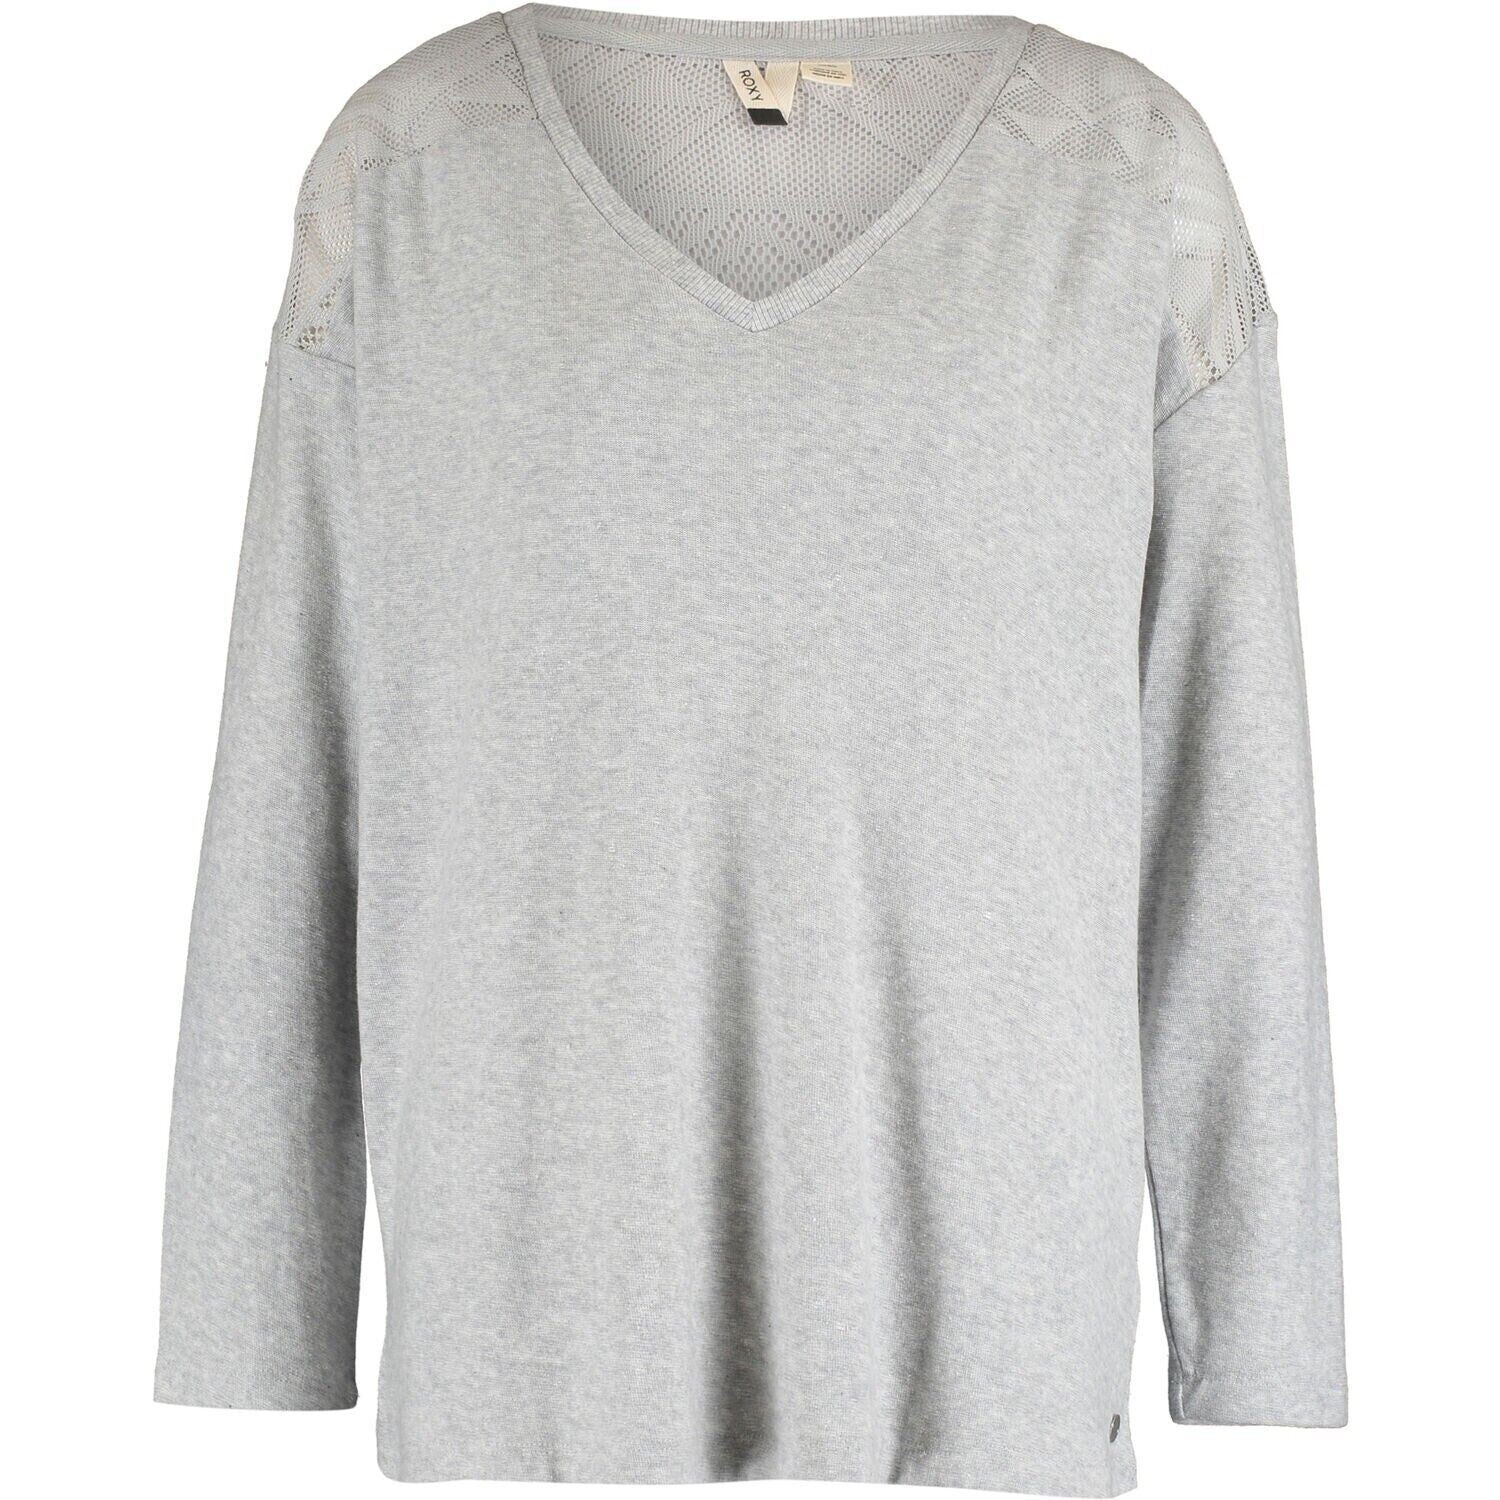 ROXY Women's 'You Gotta Be' V-neck Knitted Jumper Top, Heather Grey, size M